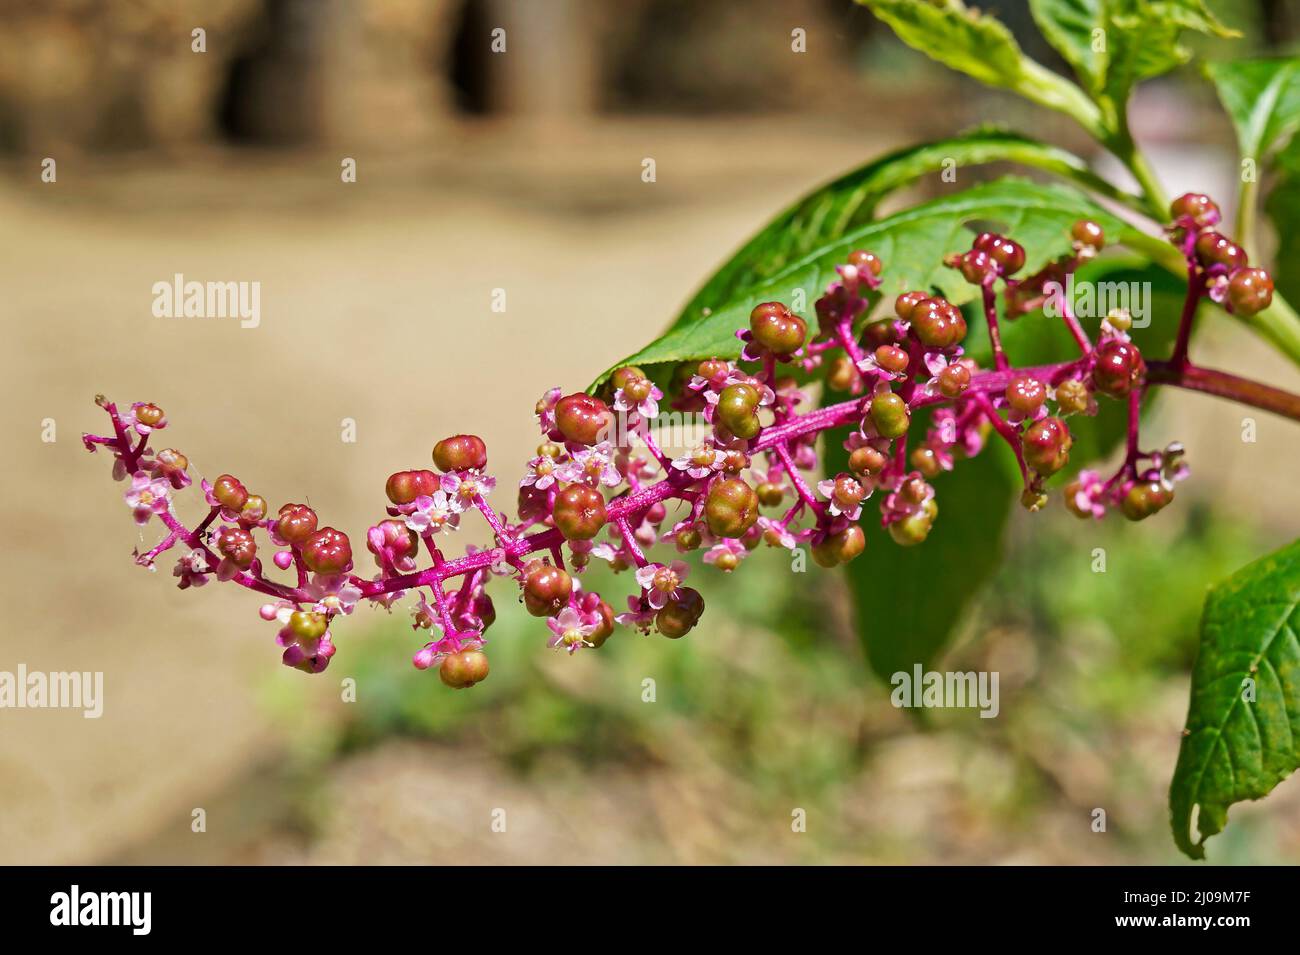 American pokeweed flowers and fruits (Phytolacca americana) Stock Photo